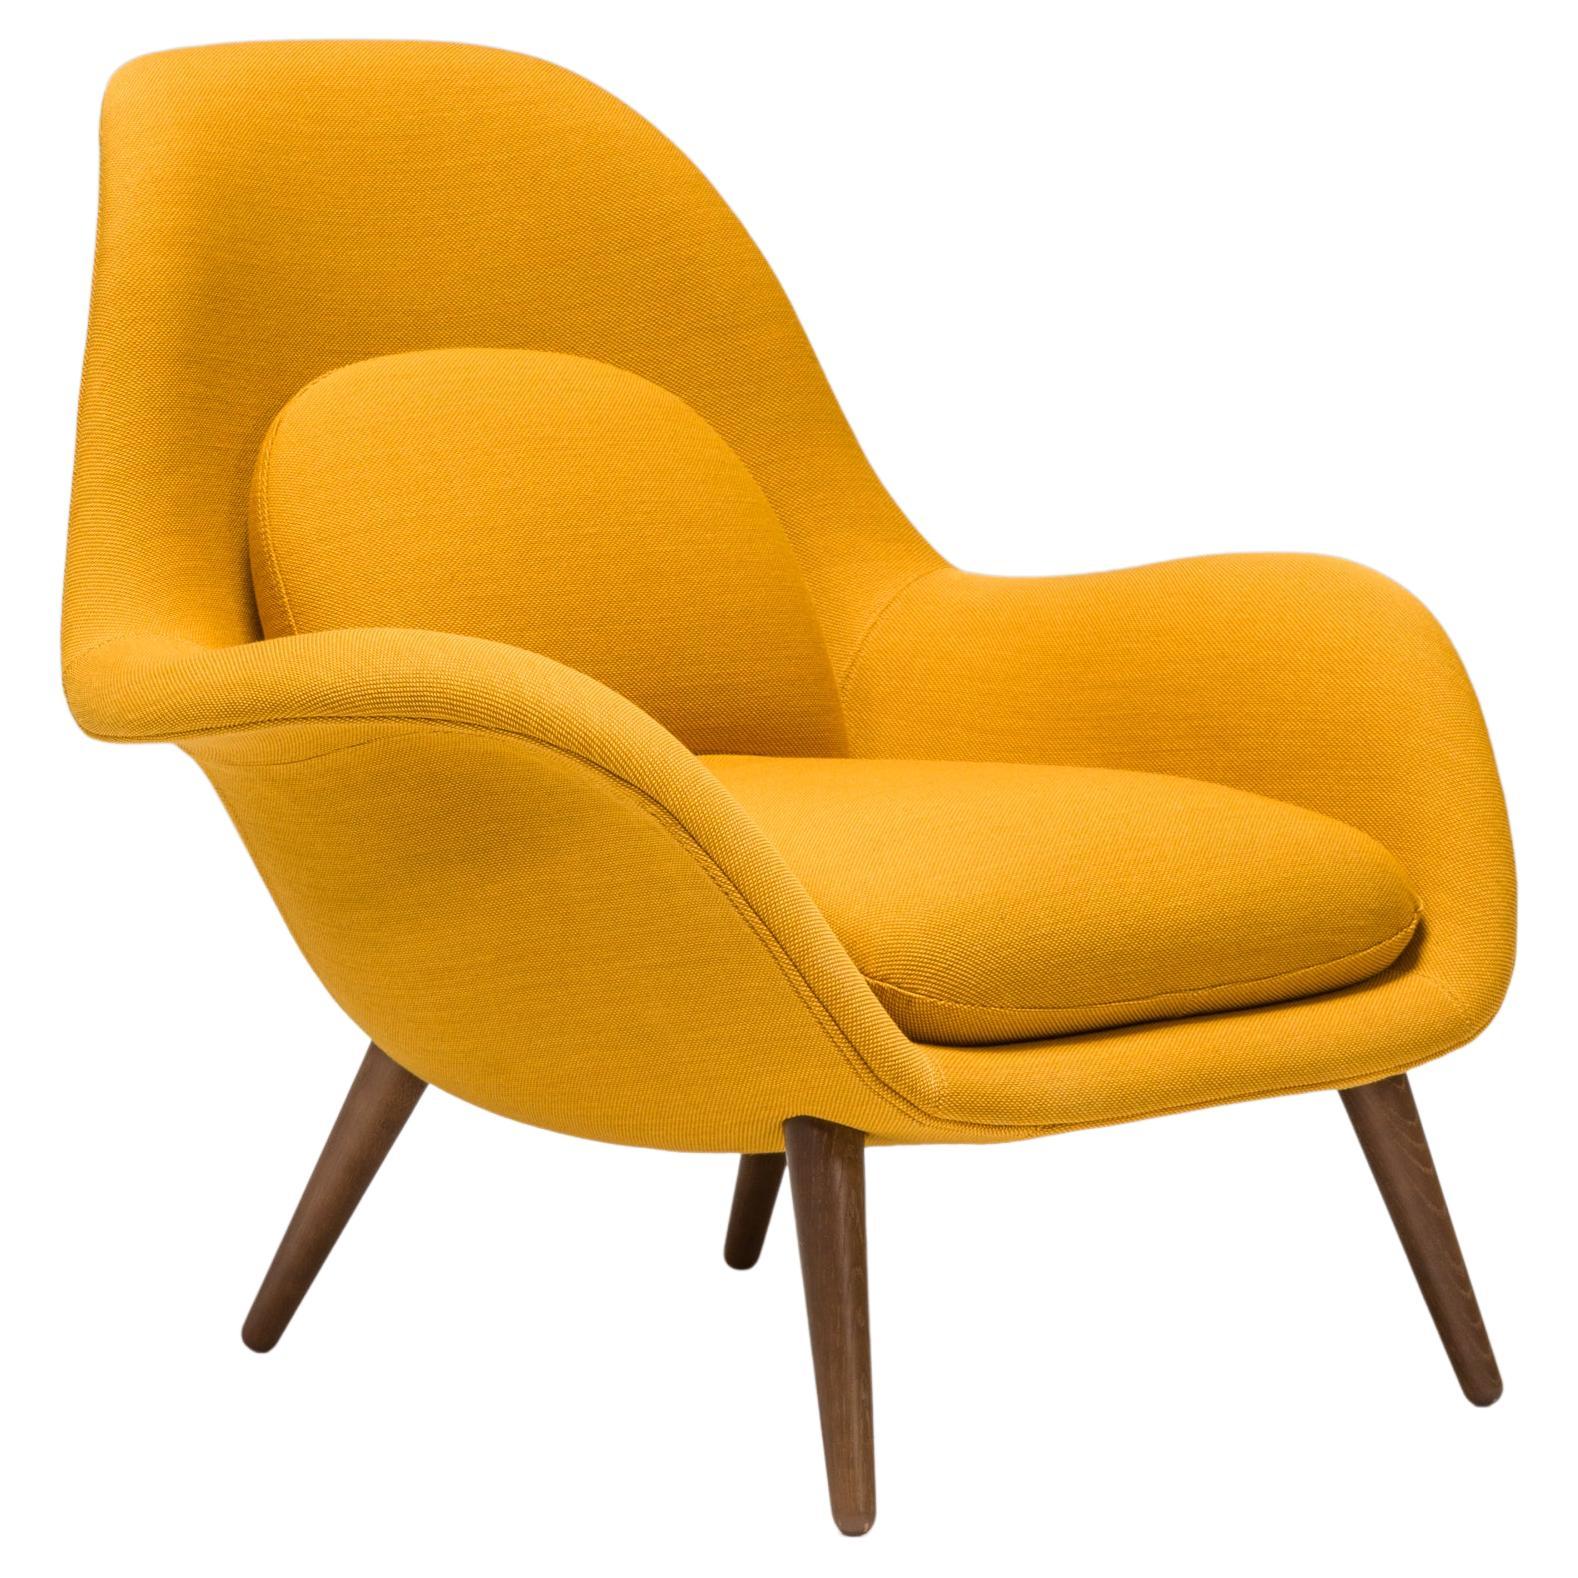 Fredericia by Space Copenhagen Mustard Yellow Fabric Swoon Lounge Armchair, 2021 For Sale